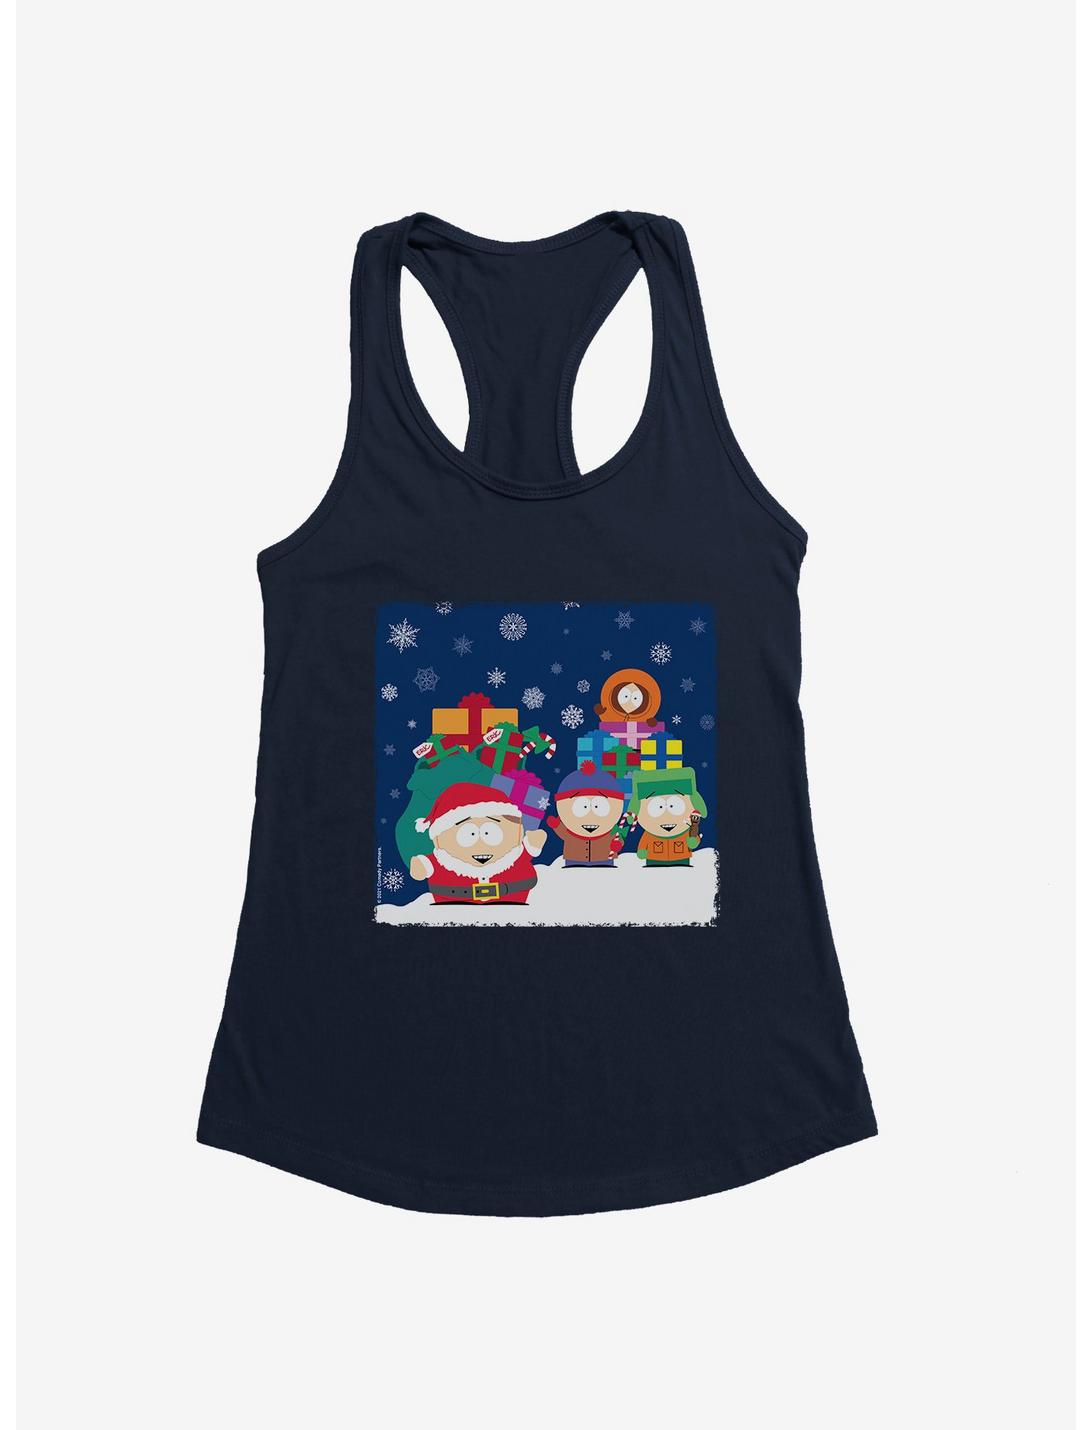 South Park Christmas Guide Presents Girls Tank, , hi-res